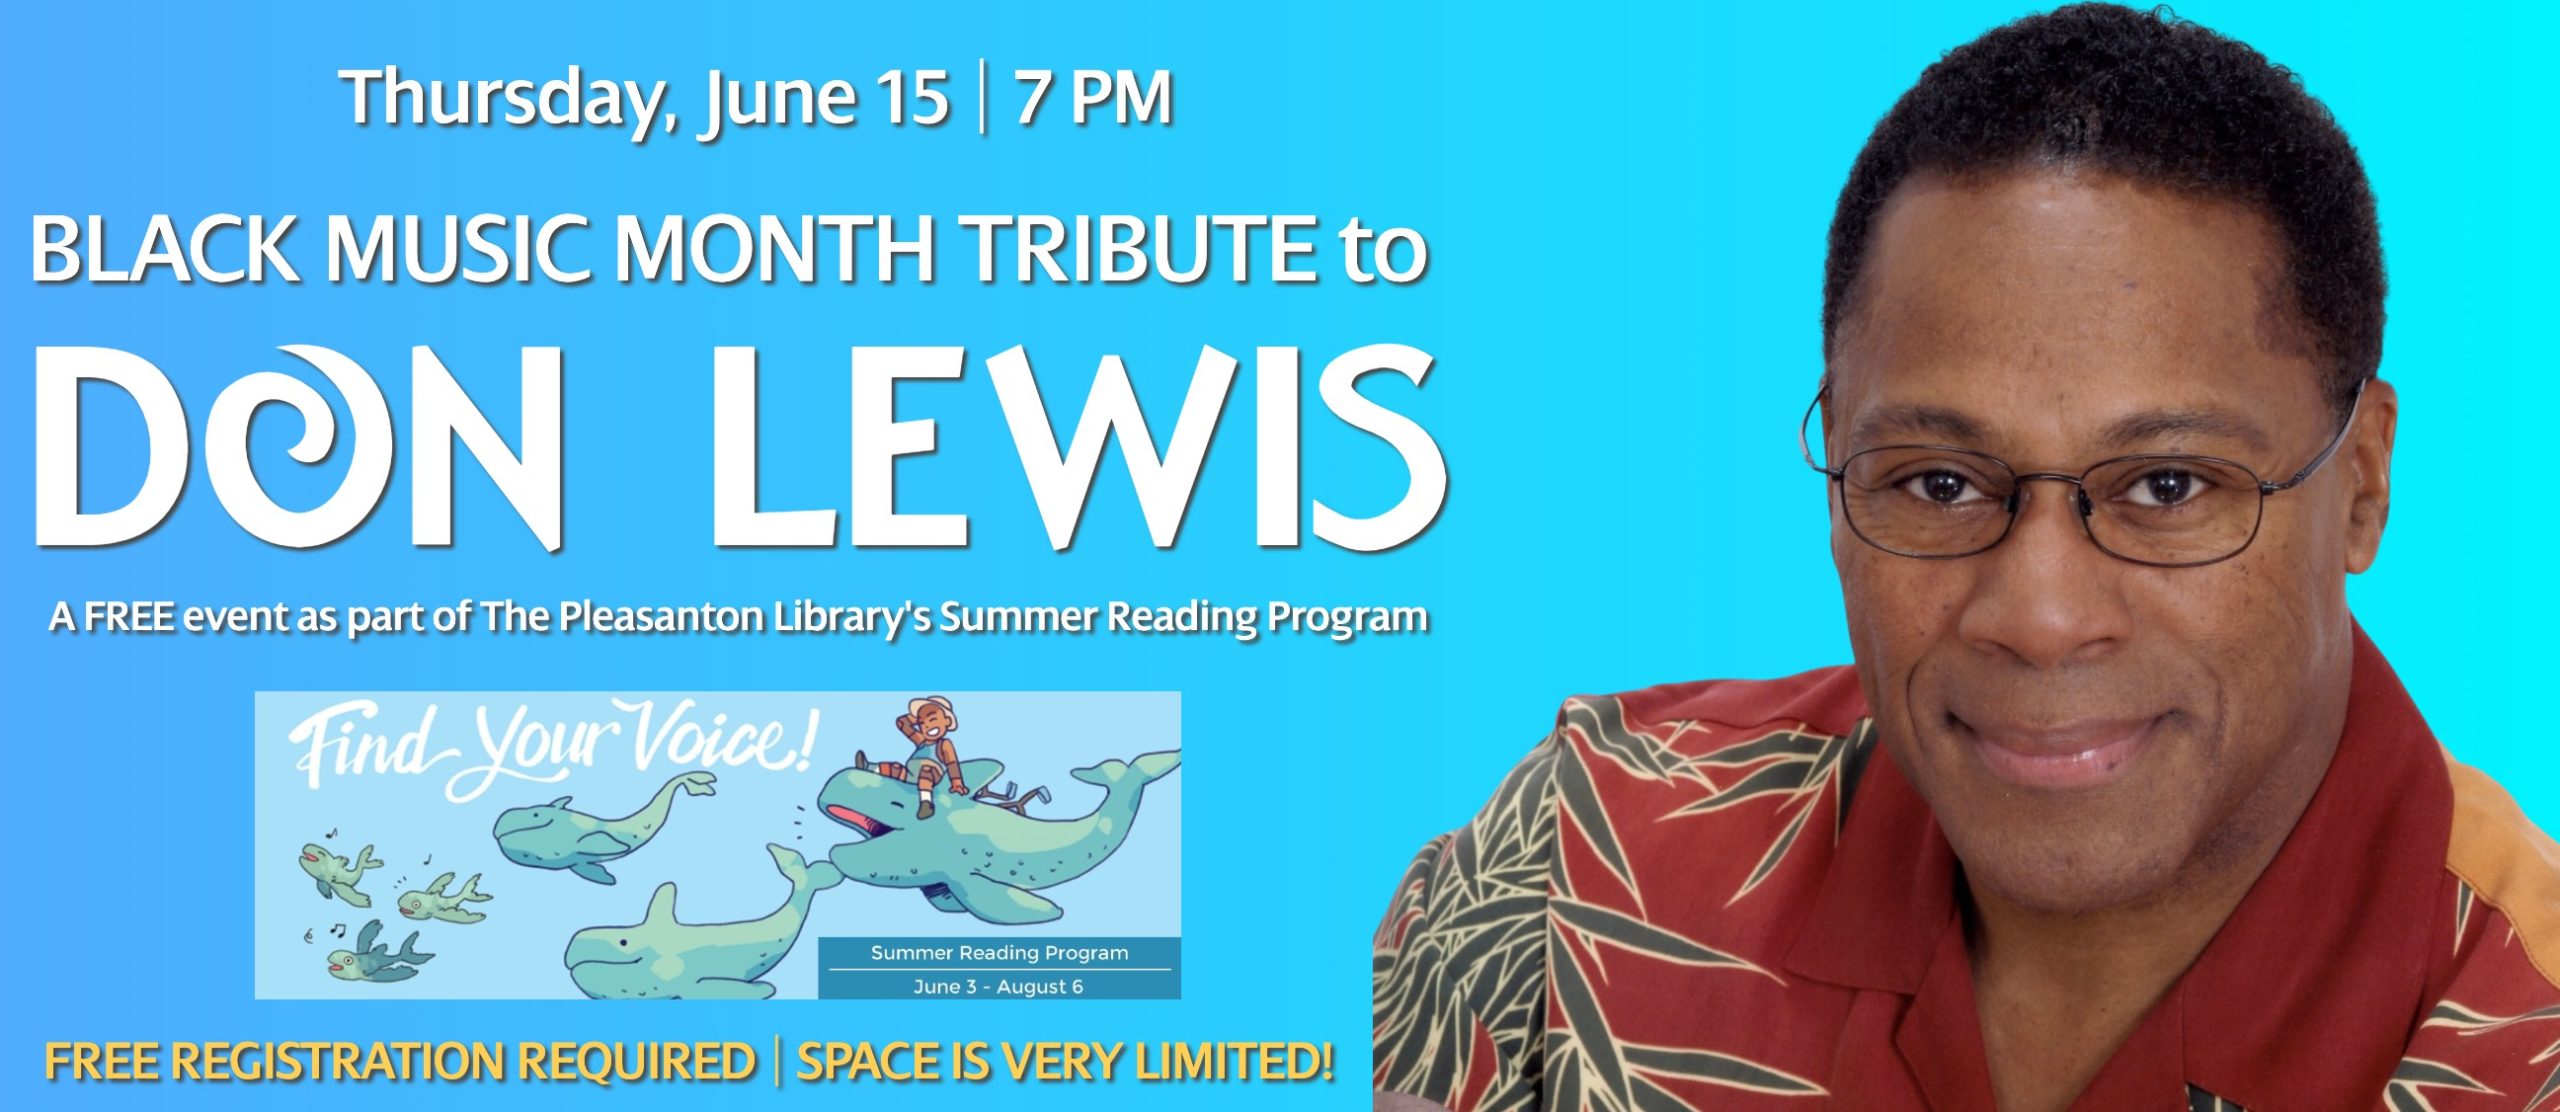 Black Music Month Tribute to Don Lewis